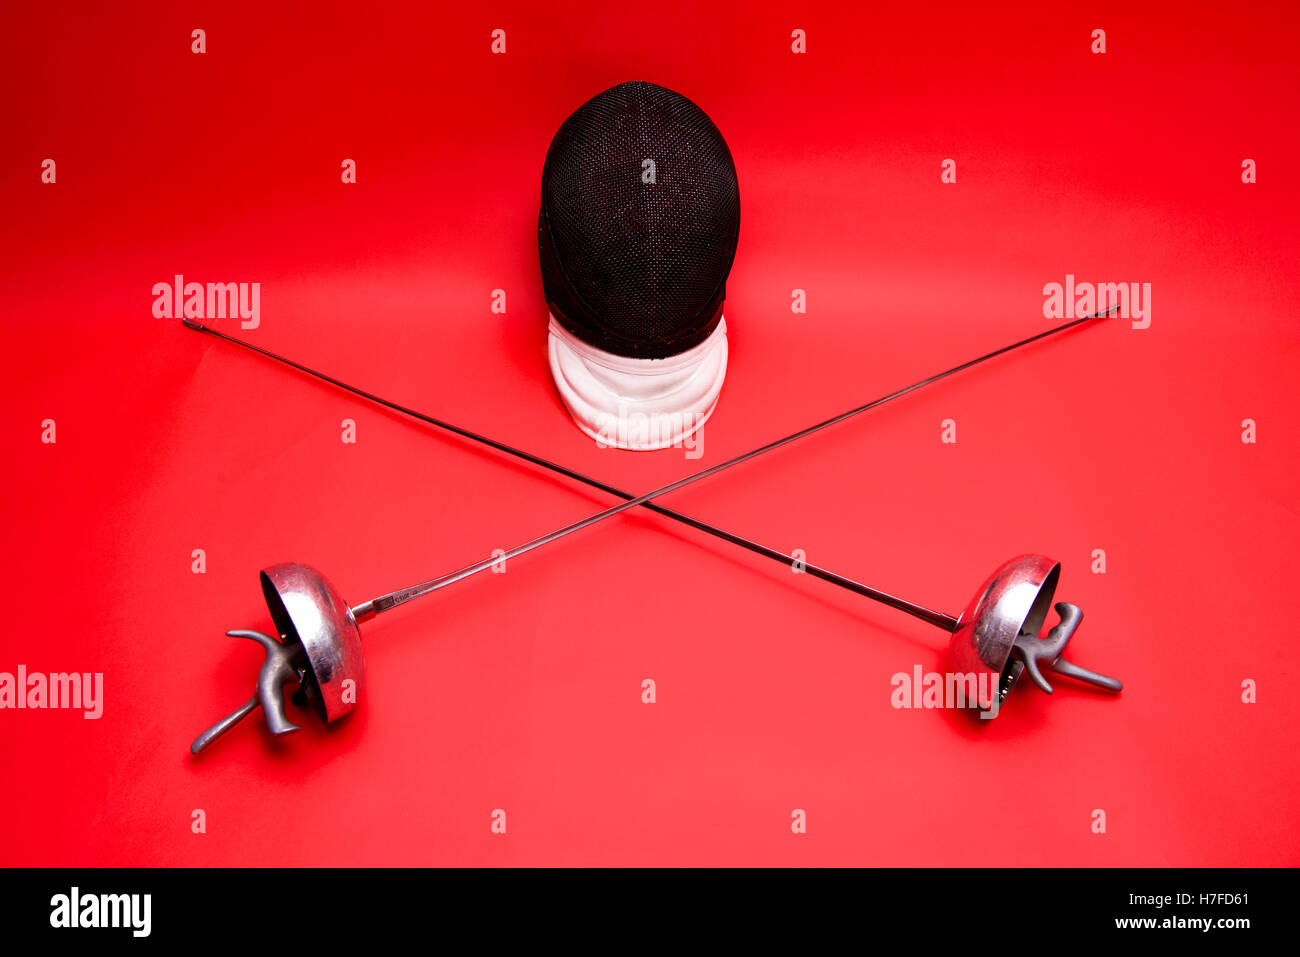 fencing helmet and two epee swords Stock Photo